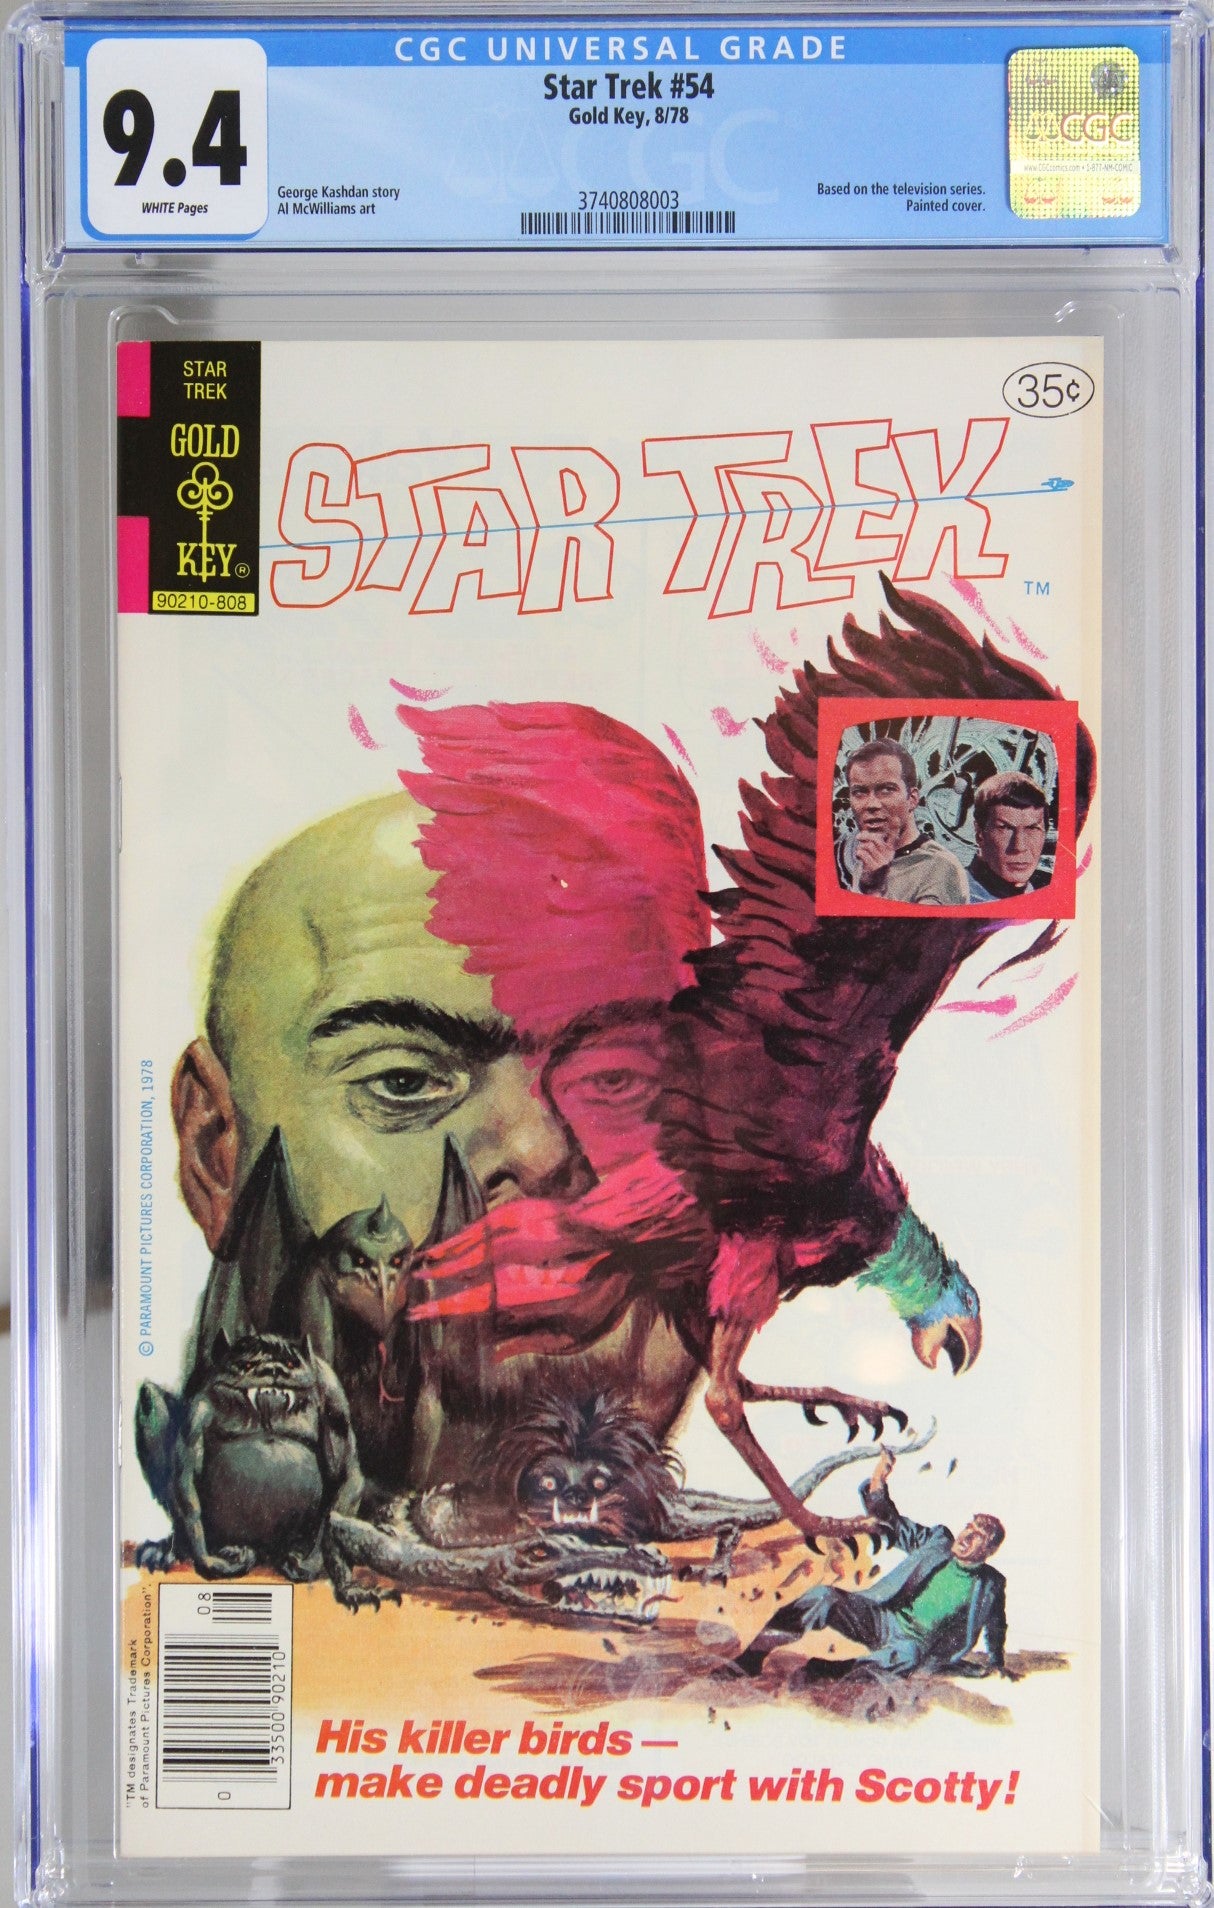 Star Trek #54 - CGC 9.4 - Based on the TV show - Painted cover